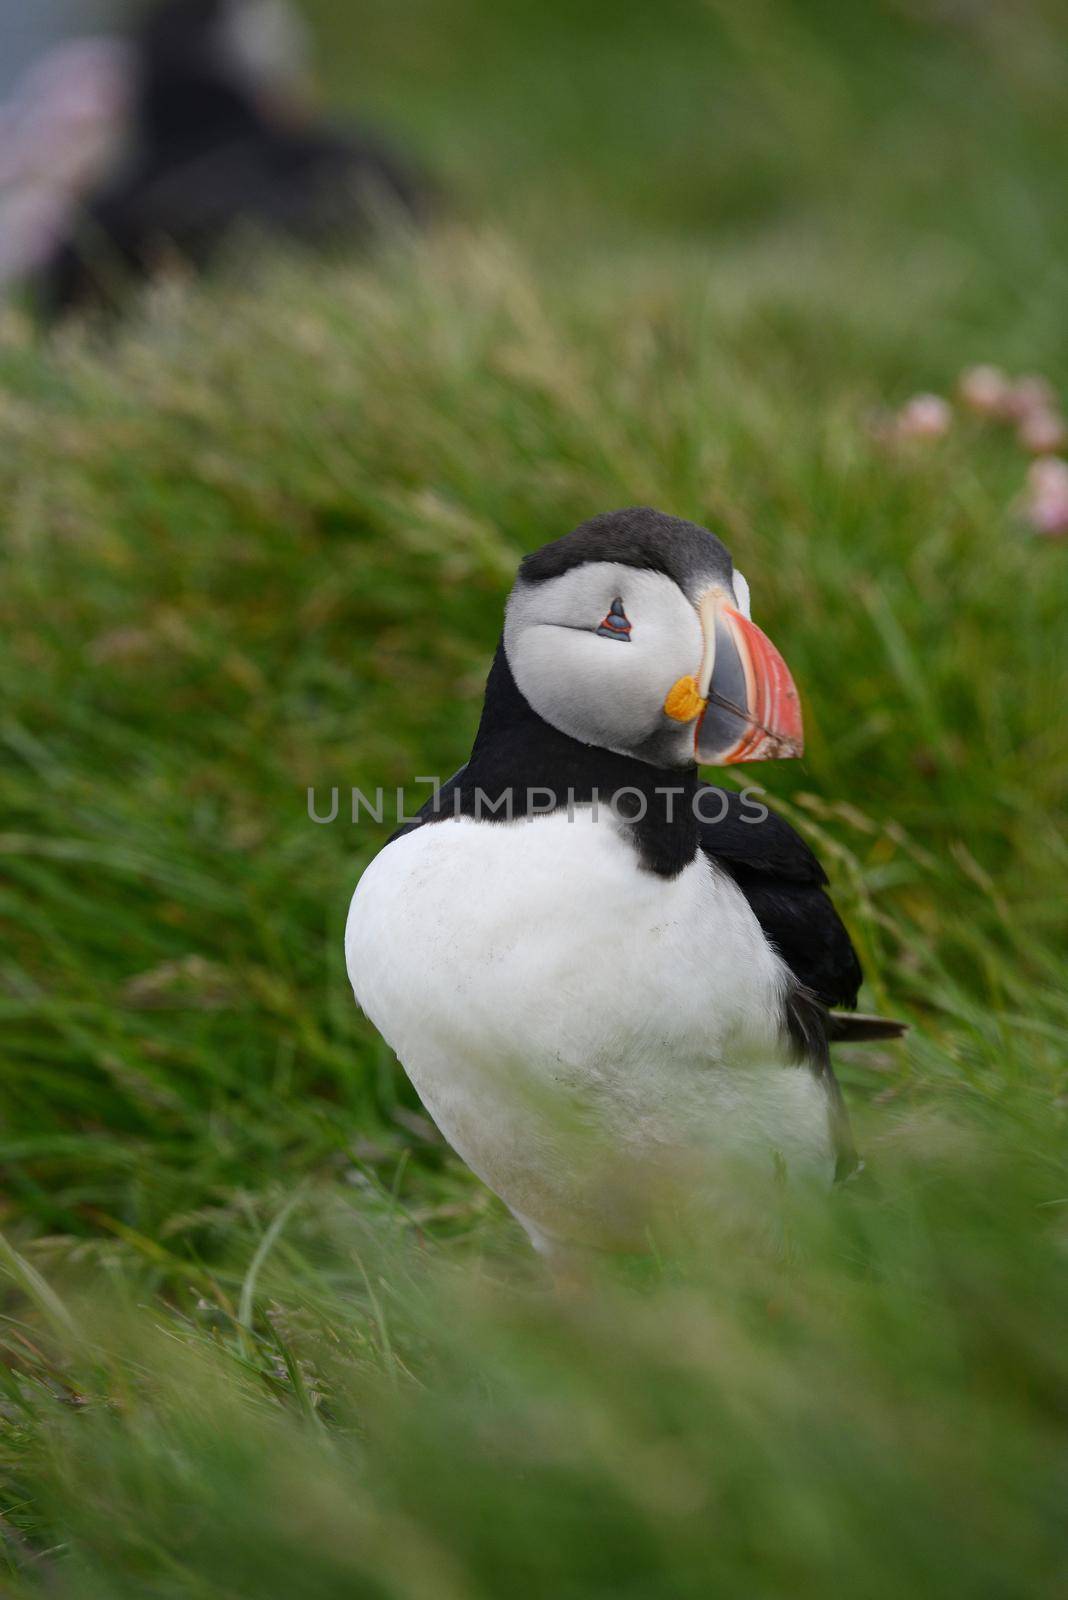 Puffin from Iceland by porbital